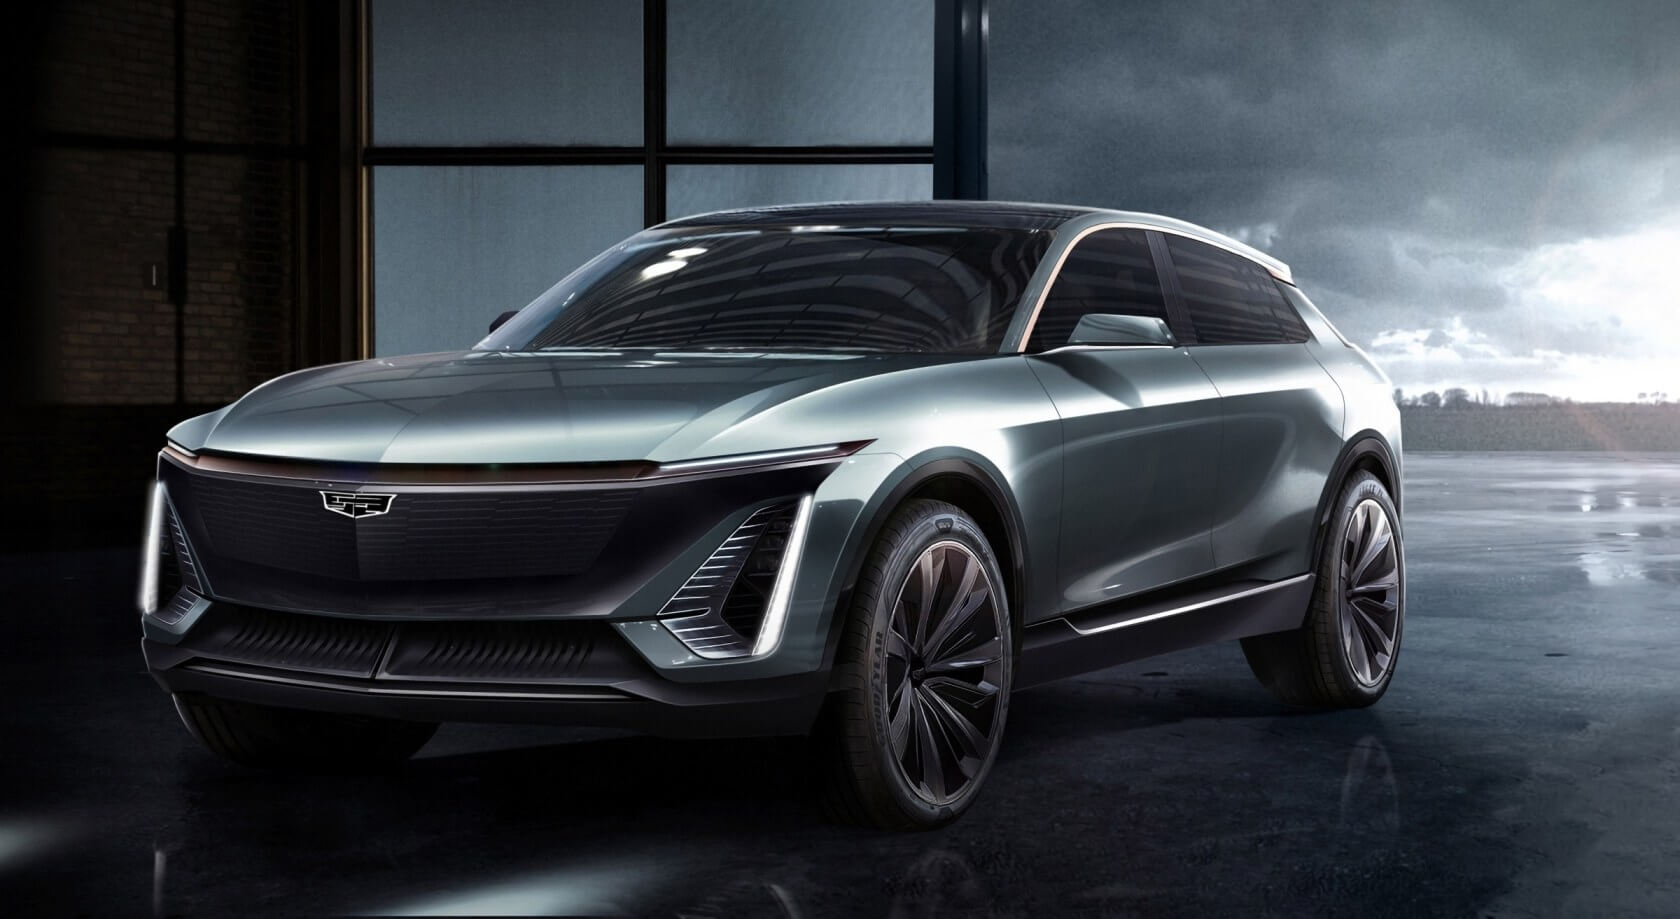 Most of Cadillac's vehicles will be fully-electric by 2030